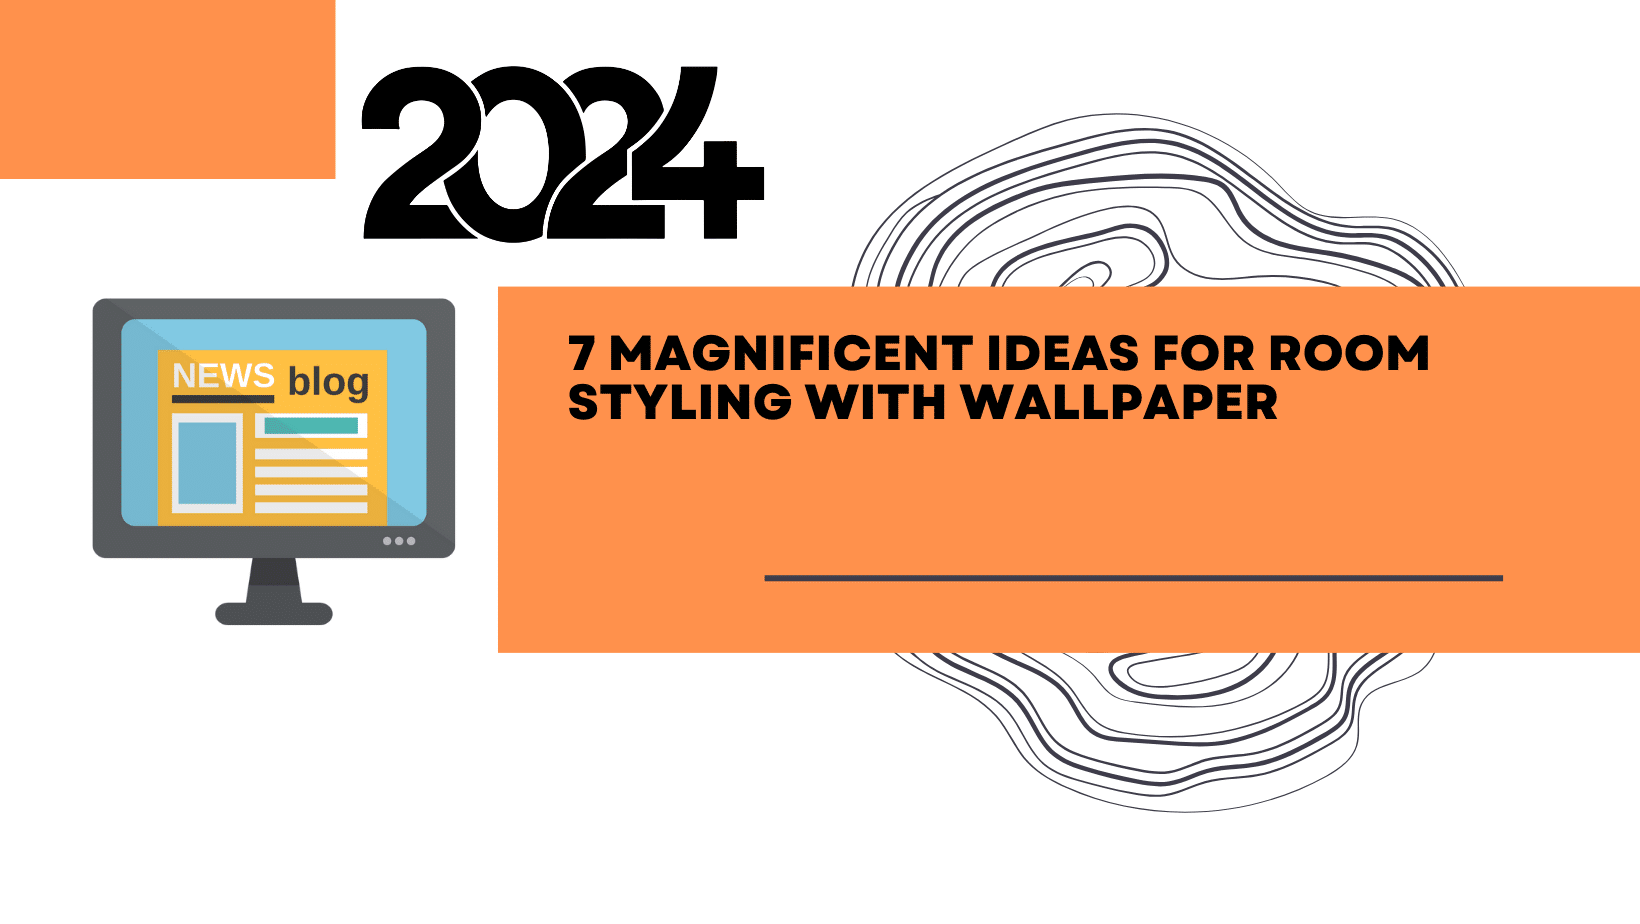 7 Magnificent Ideas for Room Styling With Wallpaper